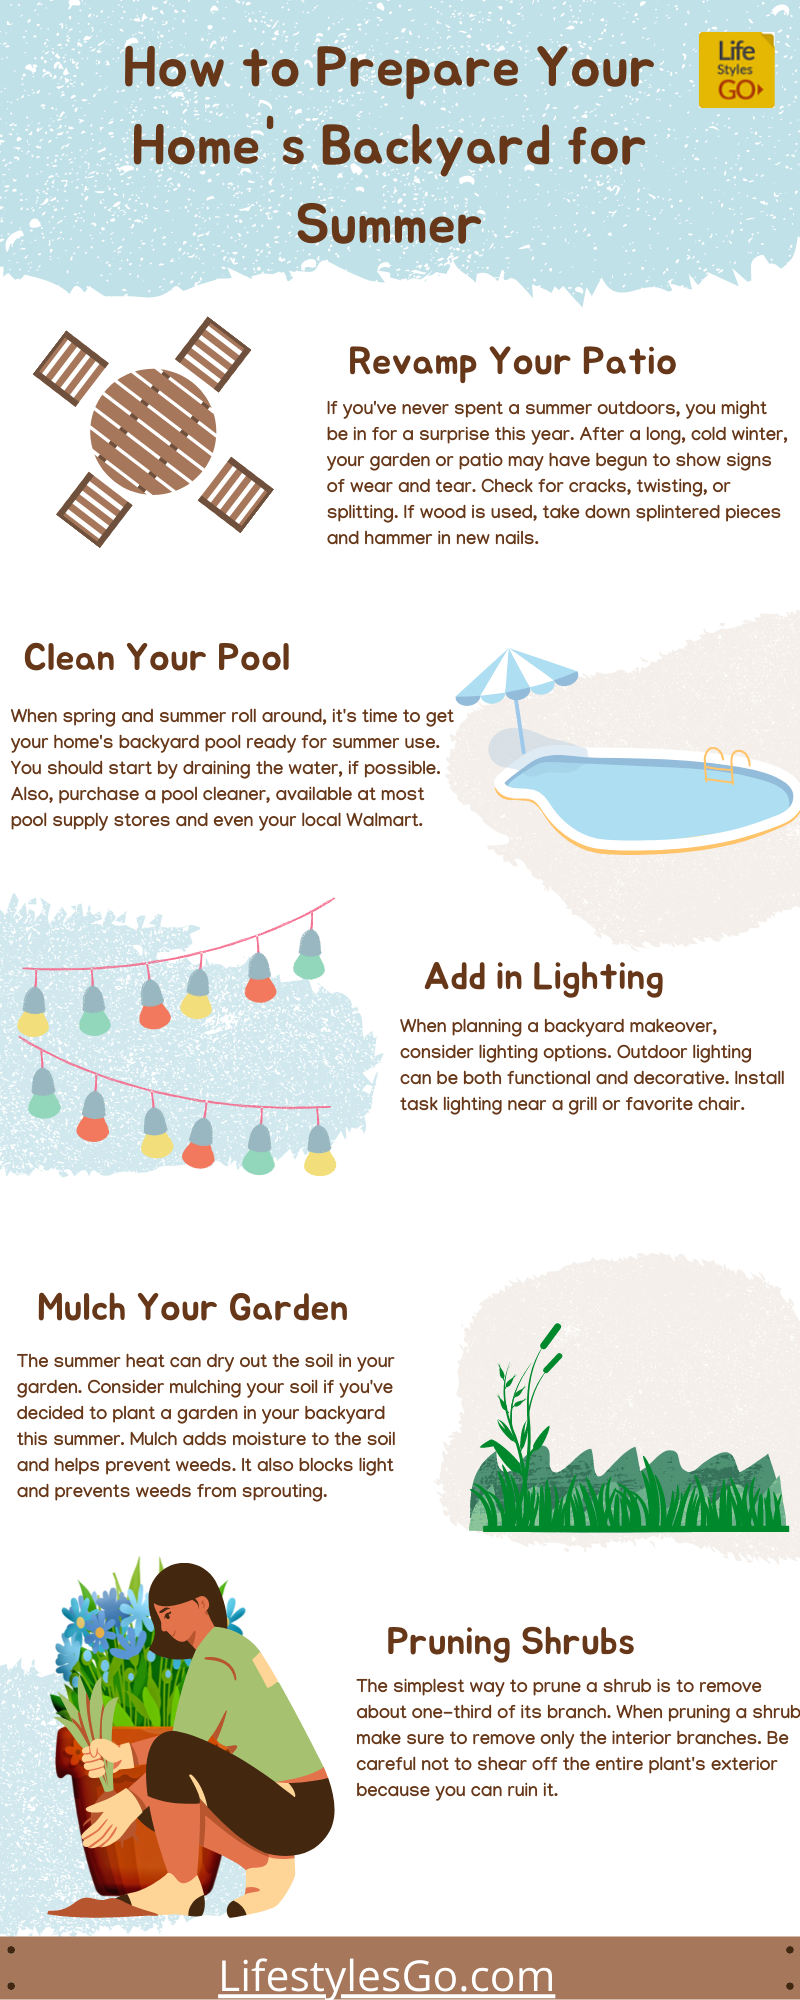 Prepare Your Home's Backyard for Summer